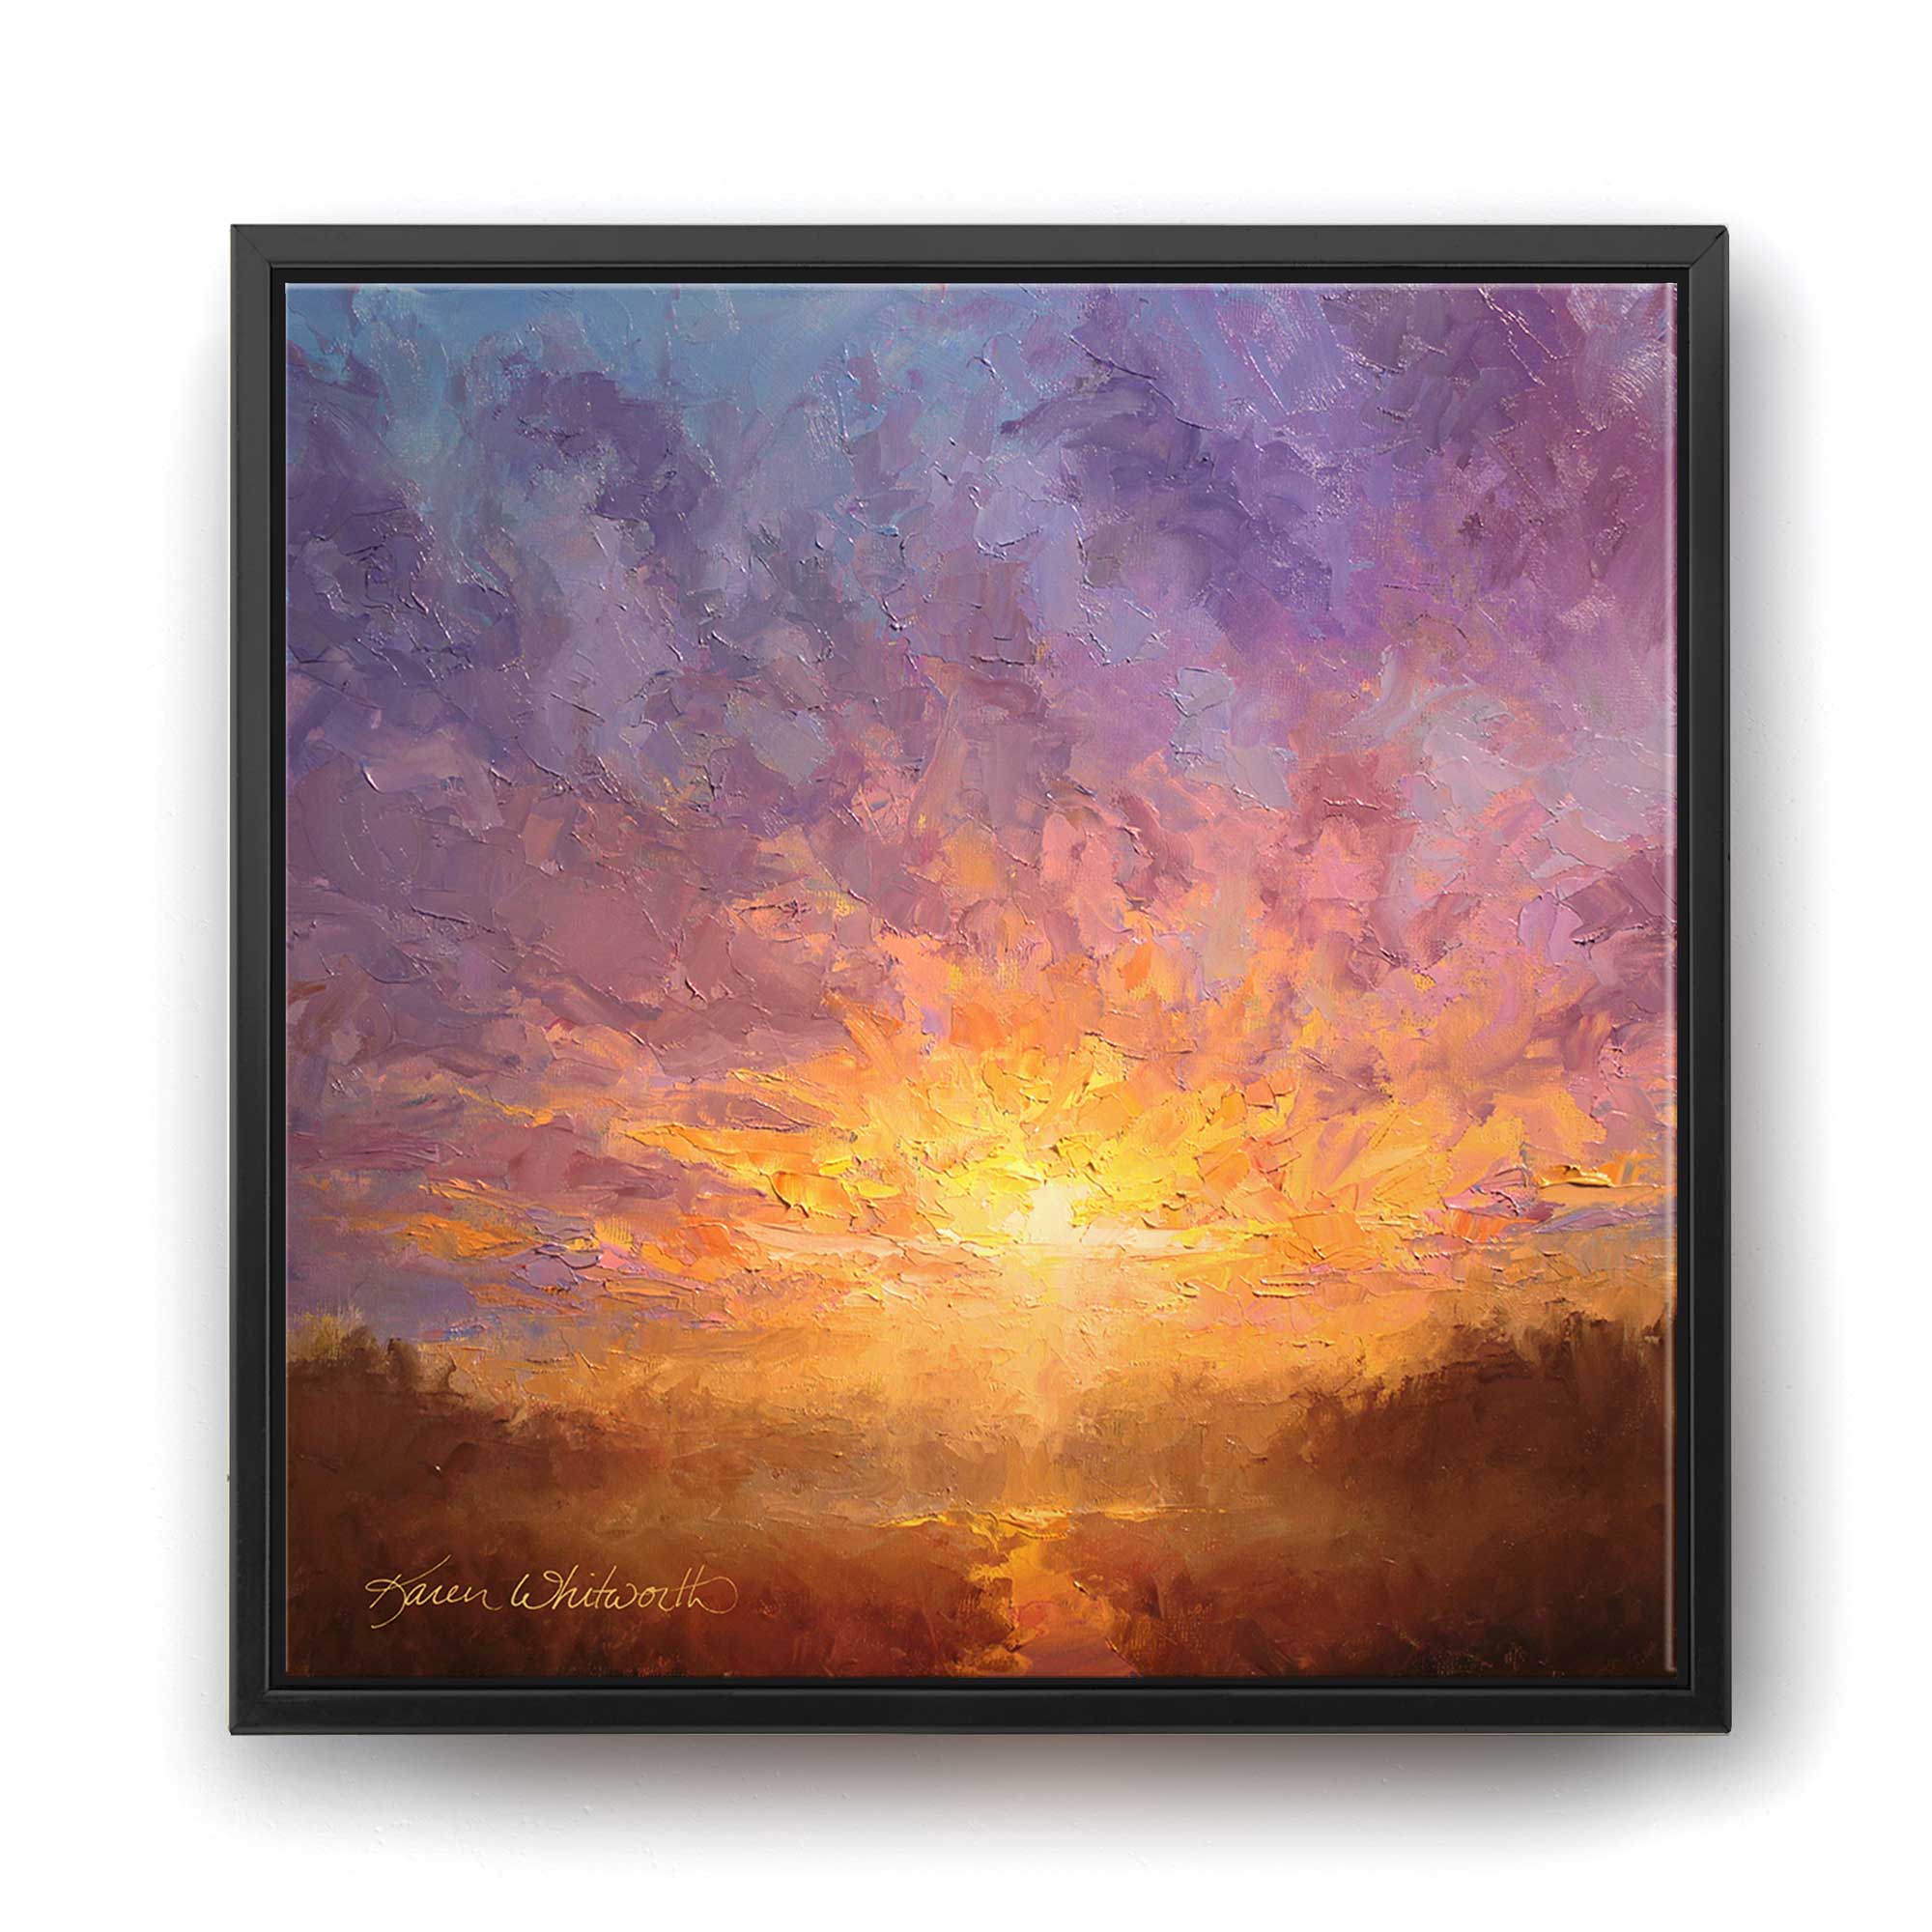 Sunrise Wall Art Canvas of Colorful Sky Painting - All Things New by Artist Karen Whitworth